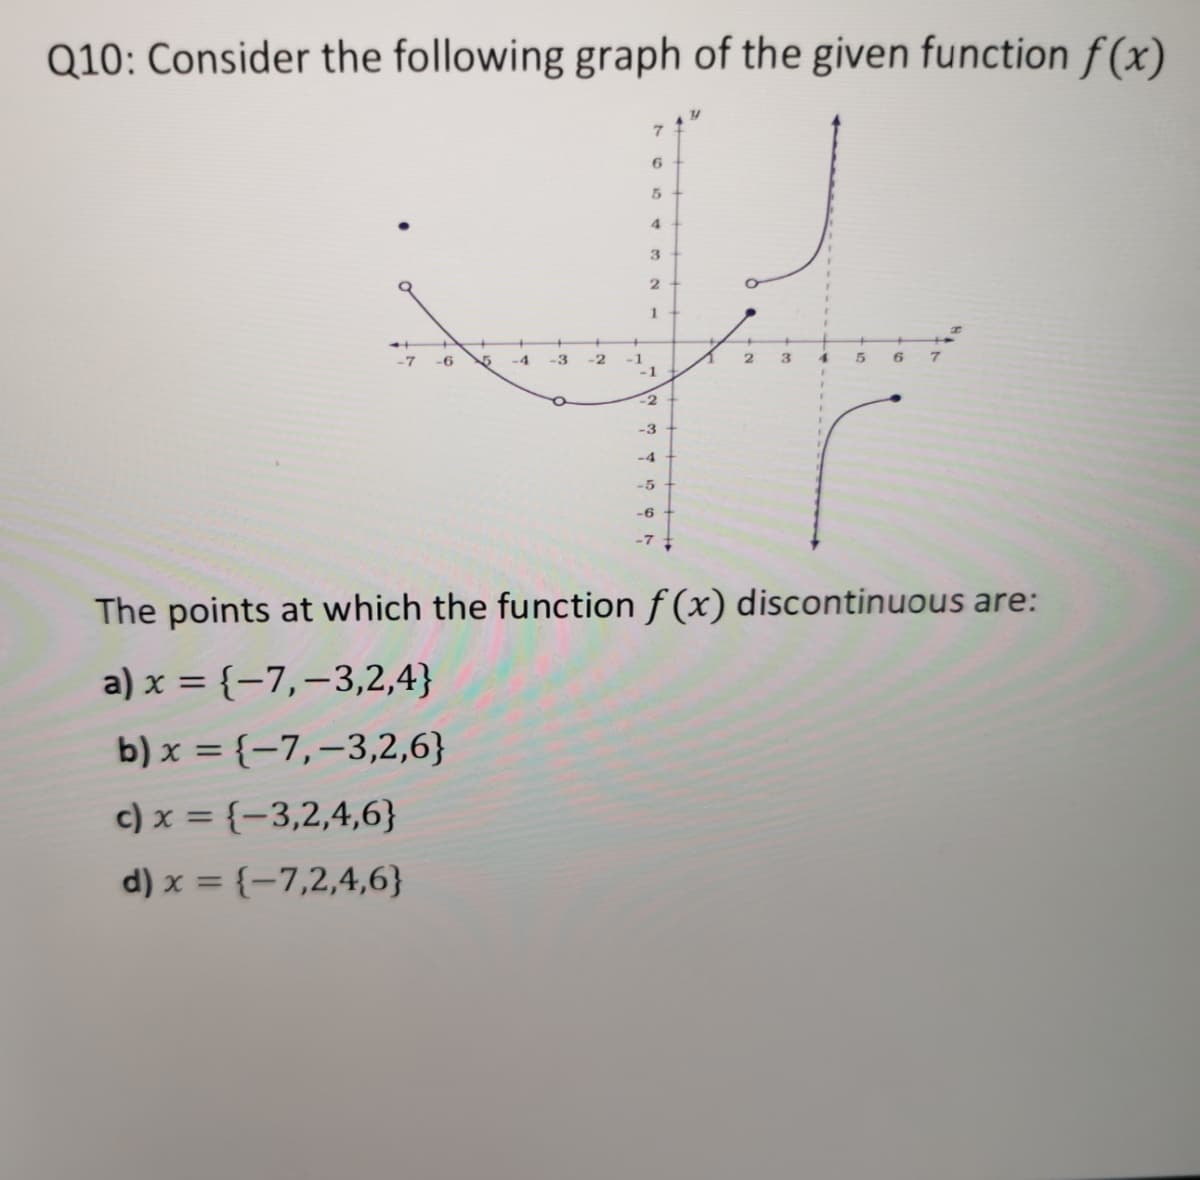 Q10: Consider the following graph of the given function f(x)
6.
4
3
1
-2
3.
4.
6.
-1
-1
-7
-6
15
-4
-3
-2
-3
-4
-5
-6
-7
The points at which the function f (x) discontinuous are:
a) x = {-7,-3,2,4}
b) x = {-7,–3,2,6}
c) x = {-3,2,4,6}
d) x = {-7,2,4,6}
